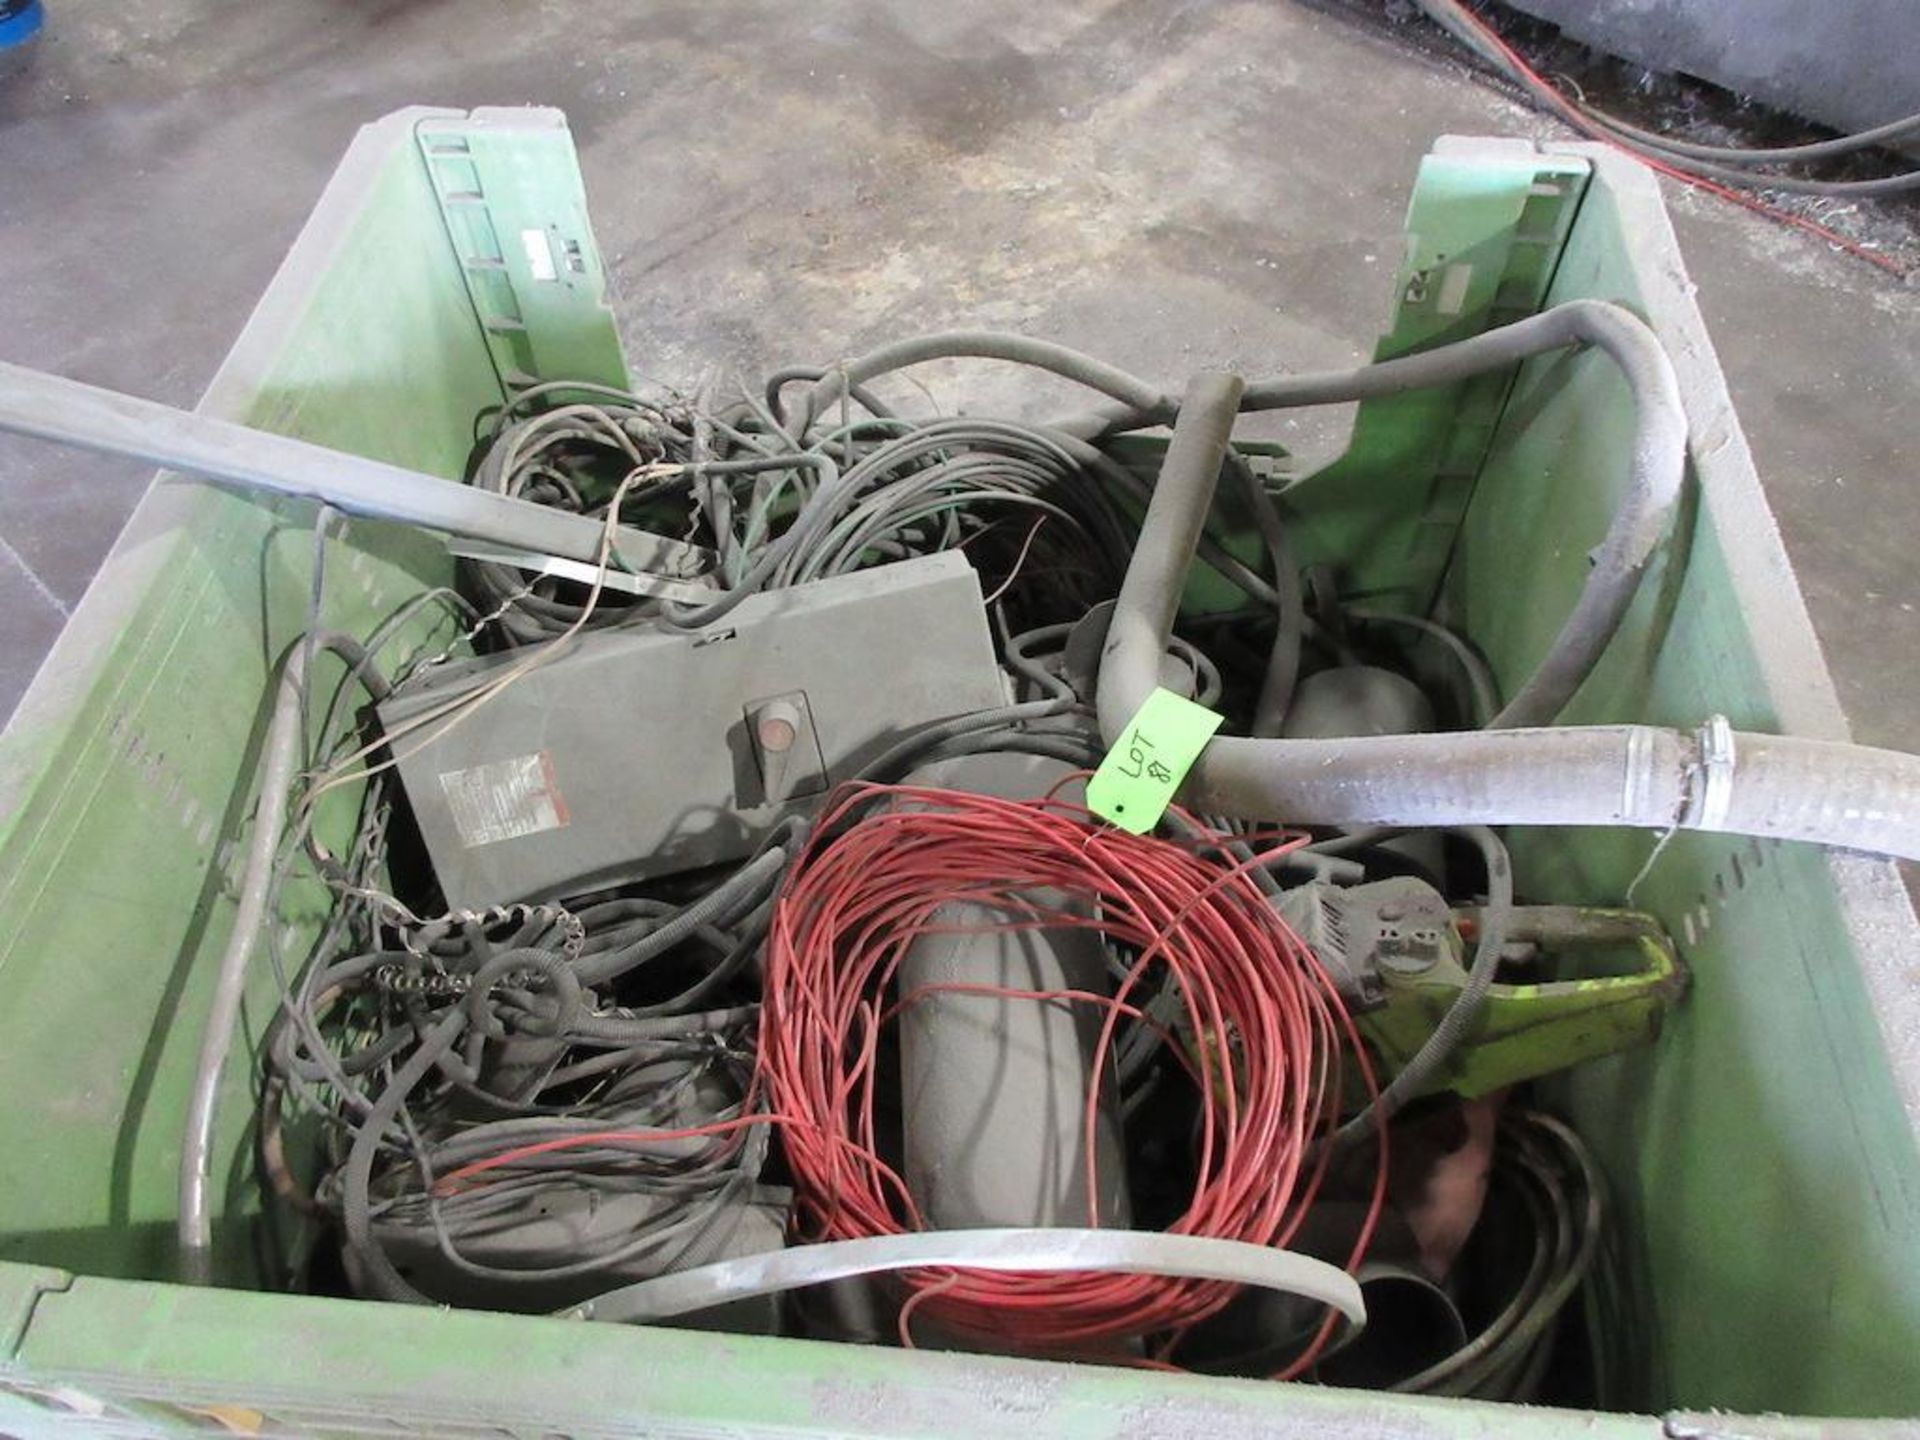 2 plastic Gaylords and 1 Pallet of Electrical Cabling, misc wires etc. - Image 5 of 6